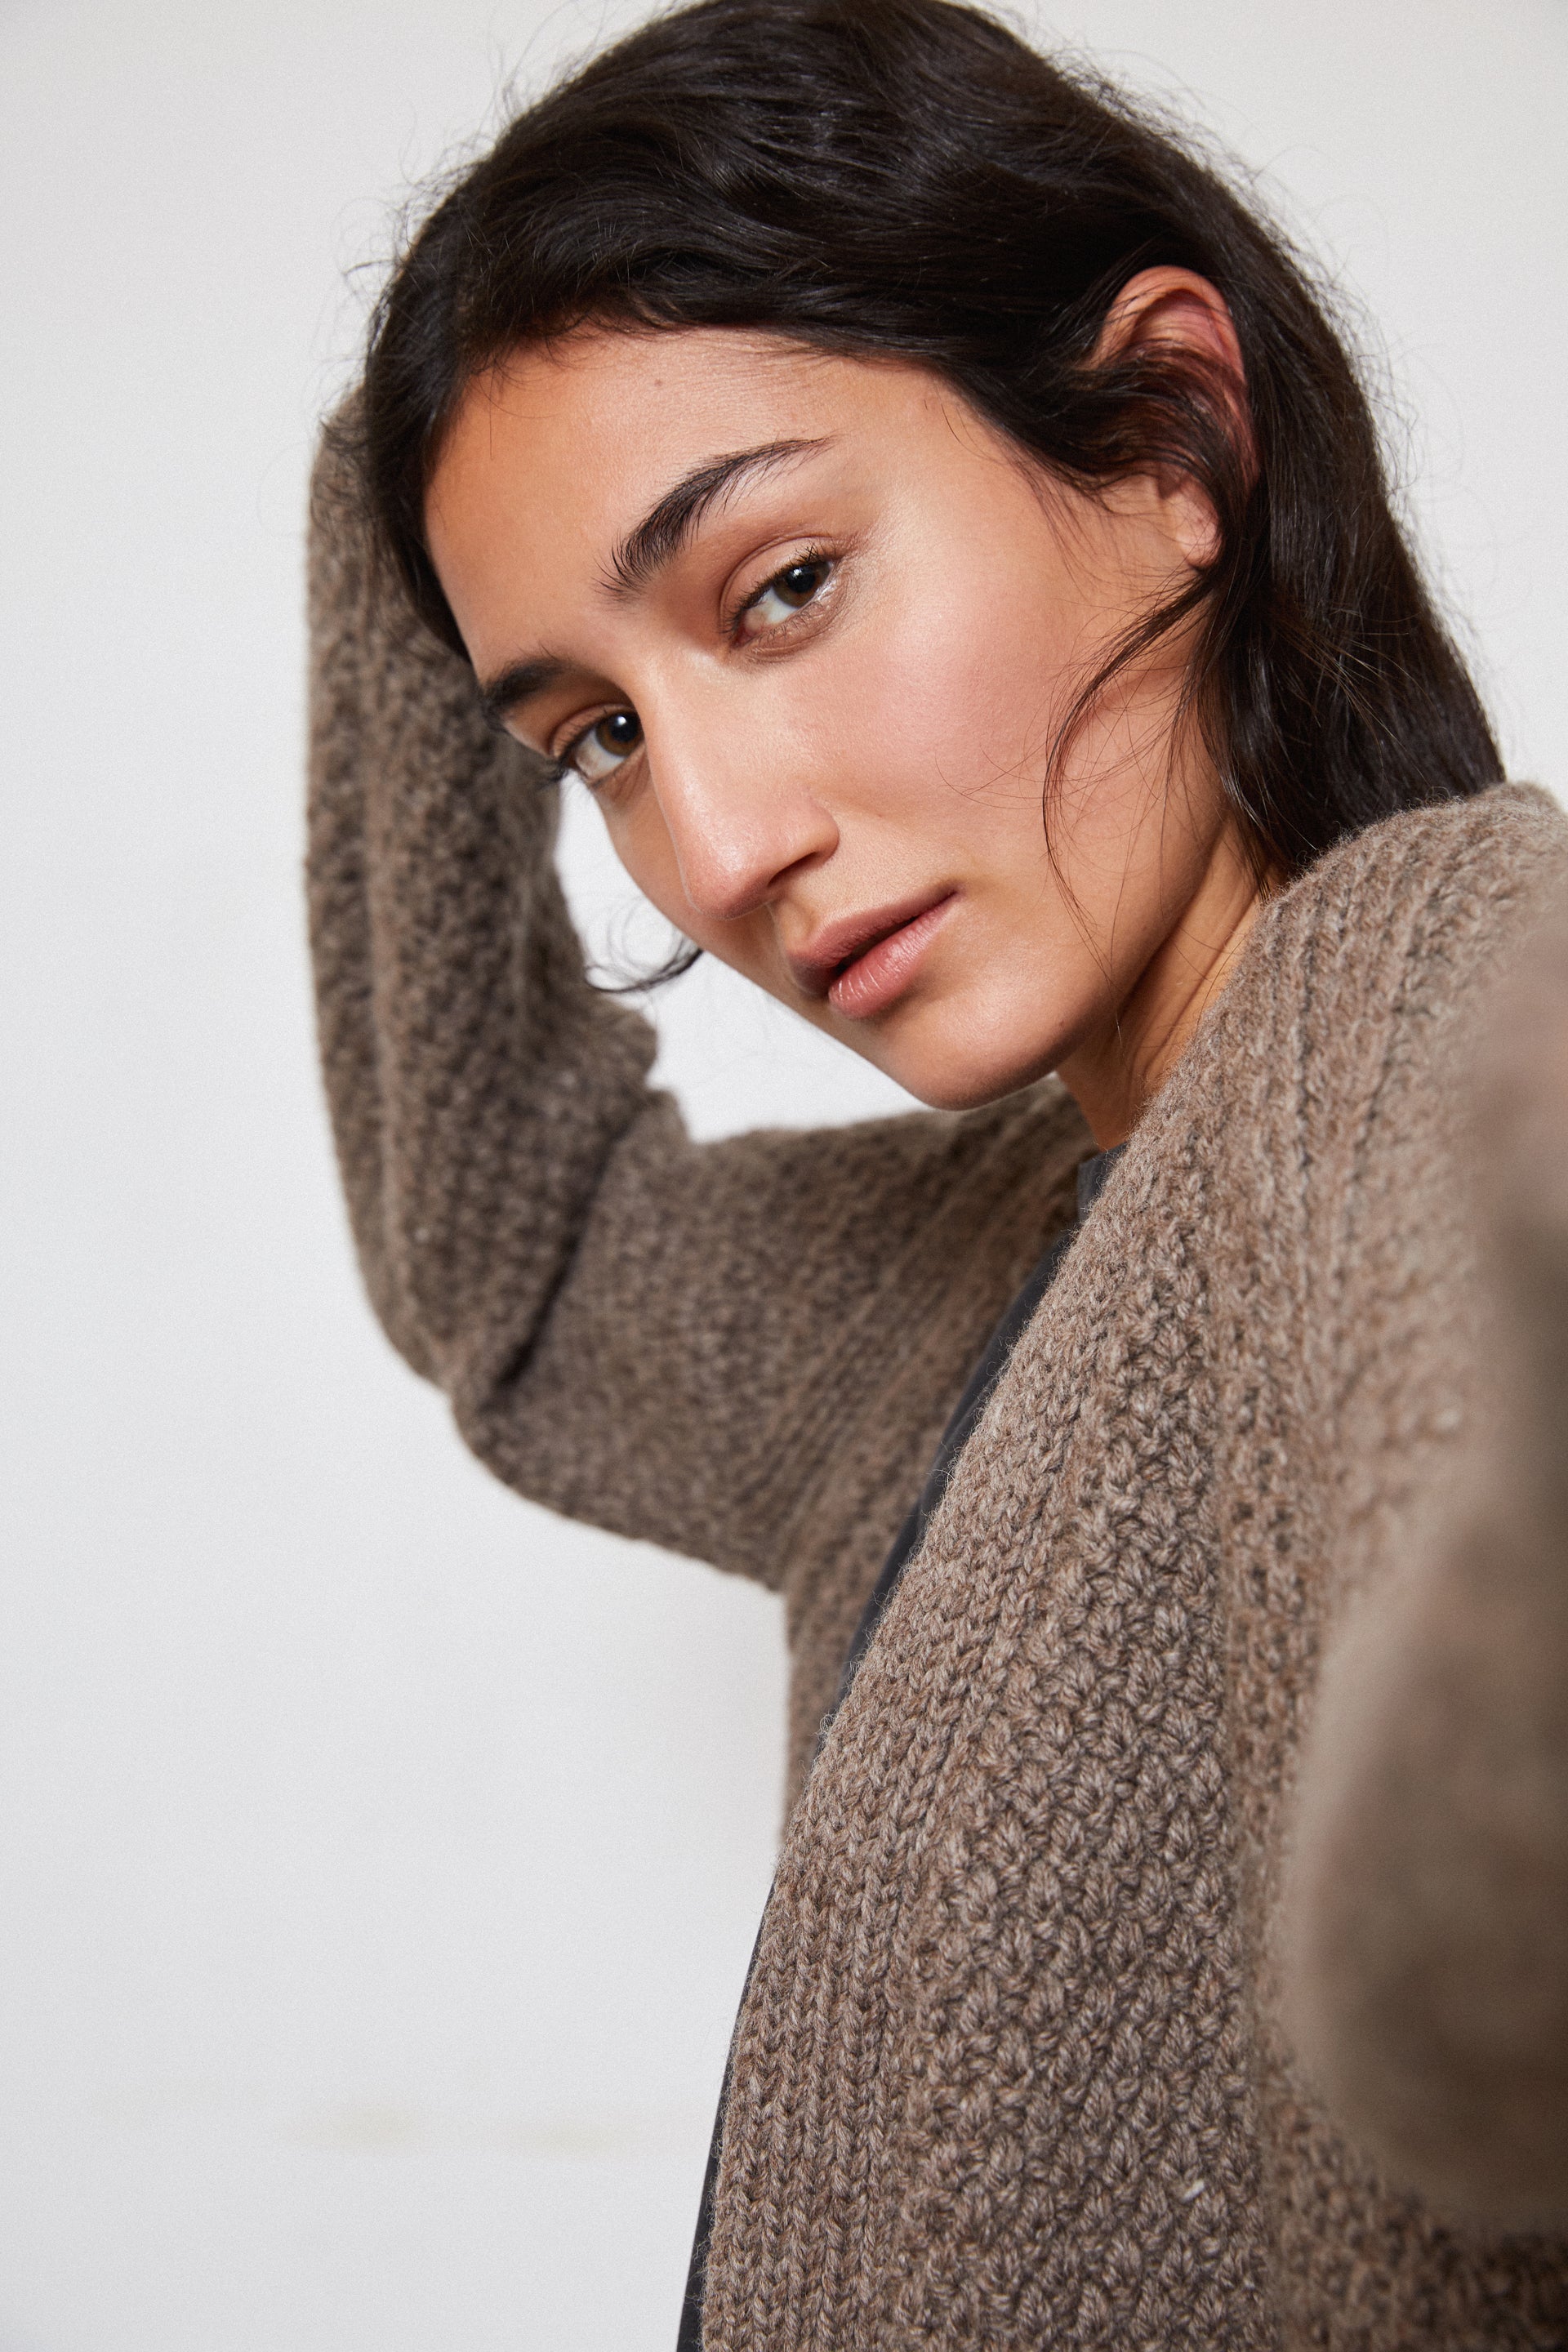 UNDYED, WOOL, HAND-KNITTED, CARDIGAN, STYLISH, SUSTAINABLE, HAND-CRAFTED, WOMENSWEAR